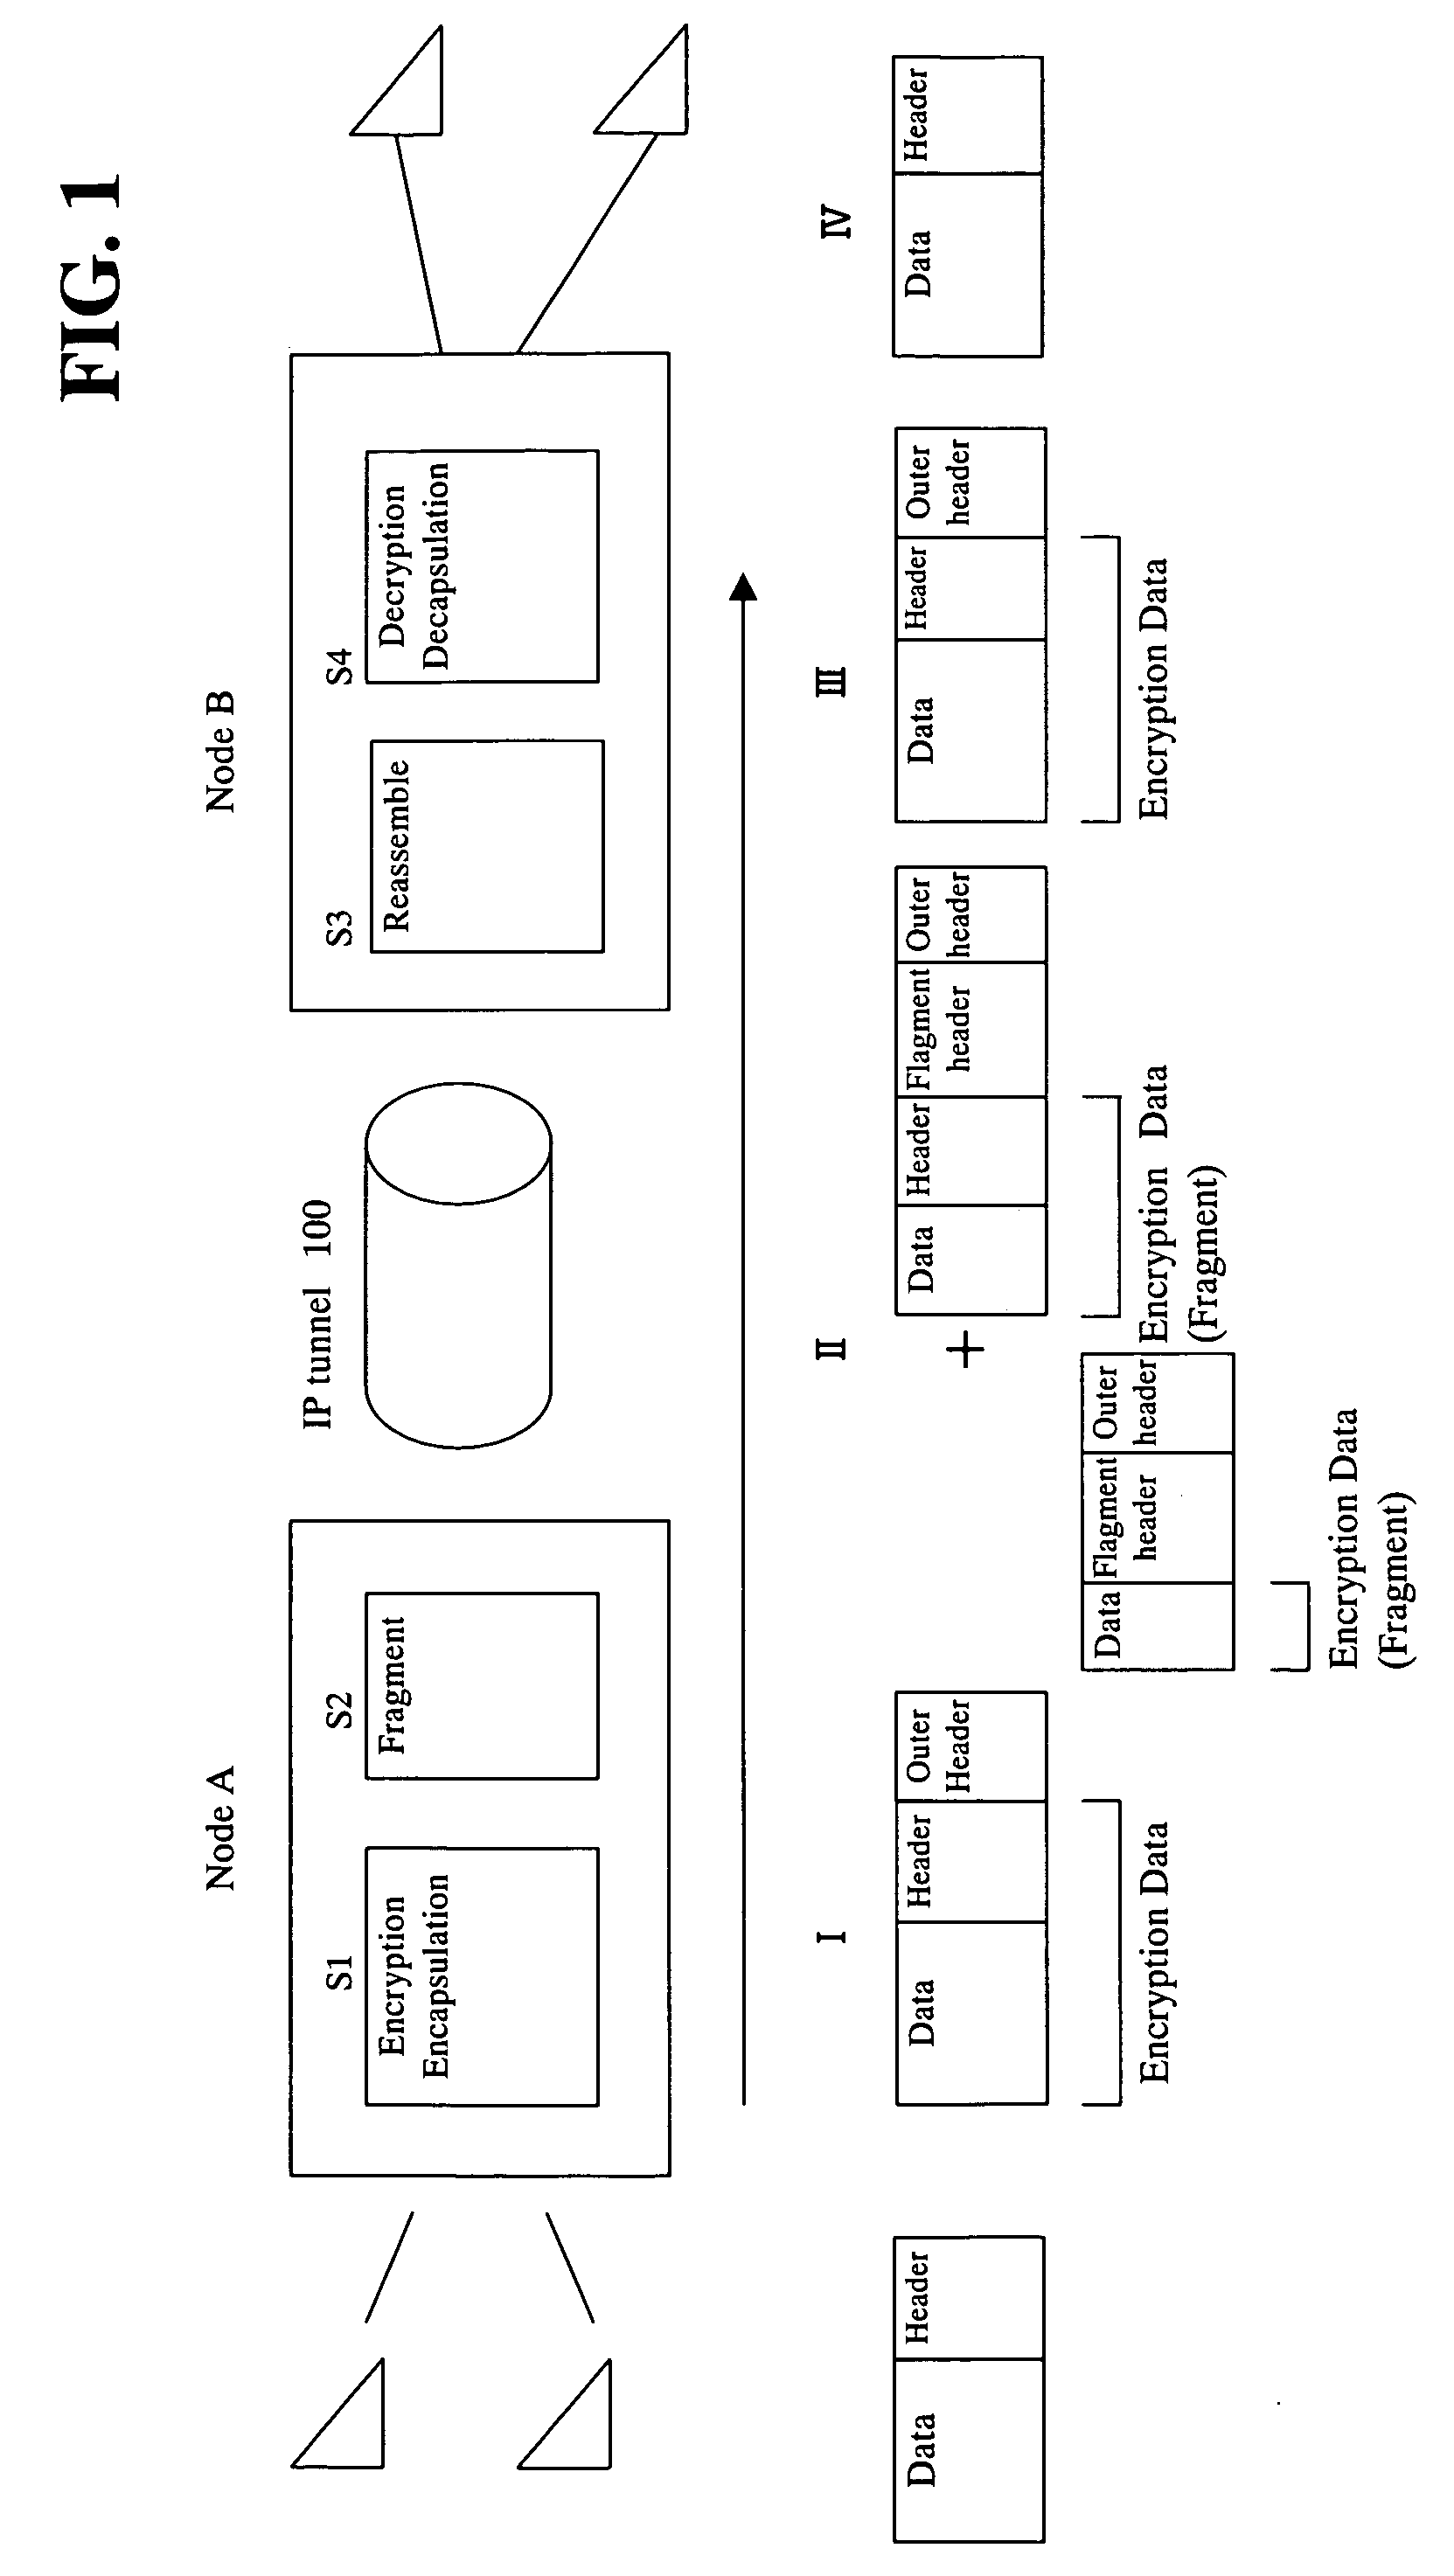 Processing method of fragmented packet